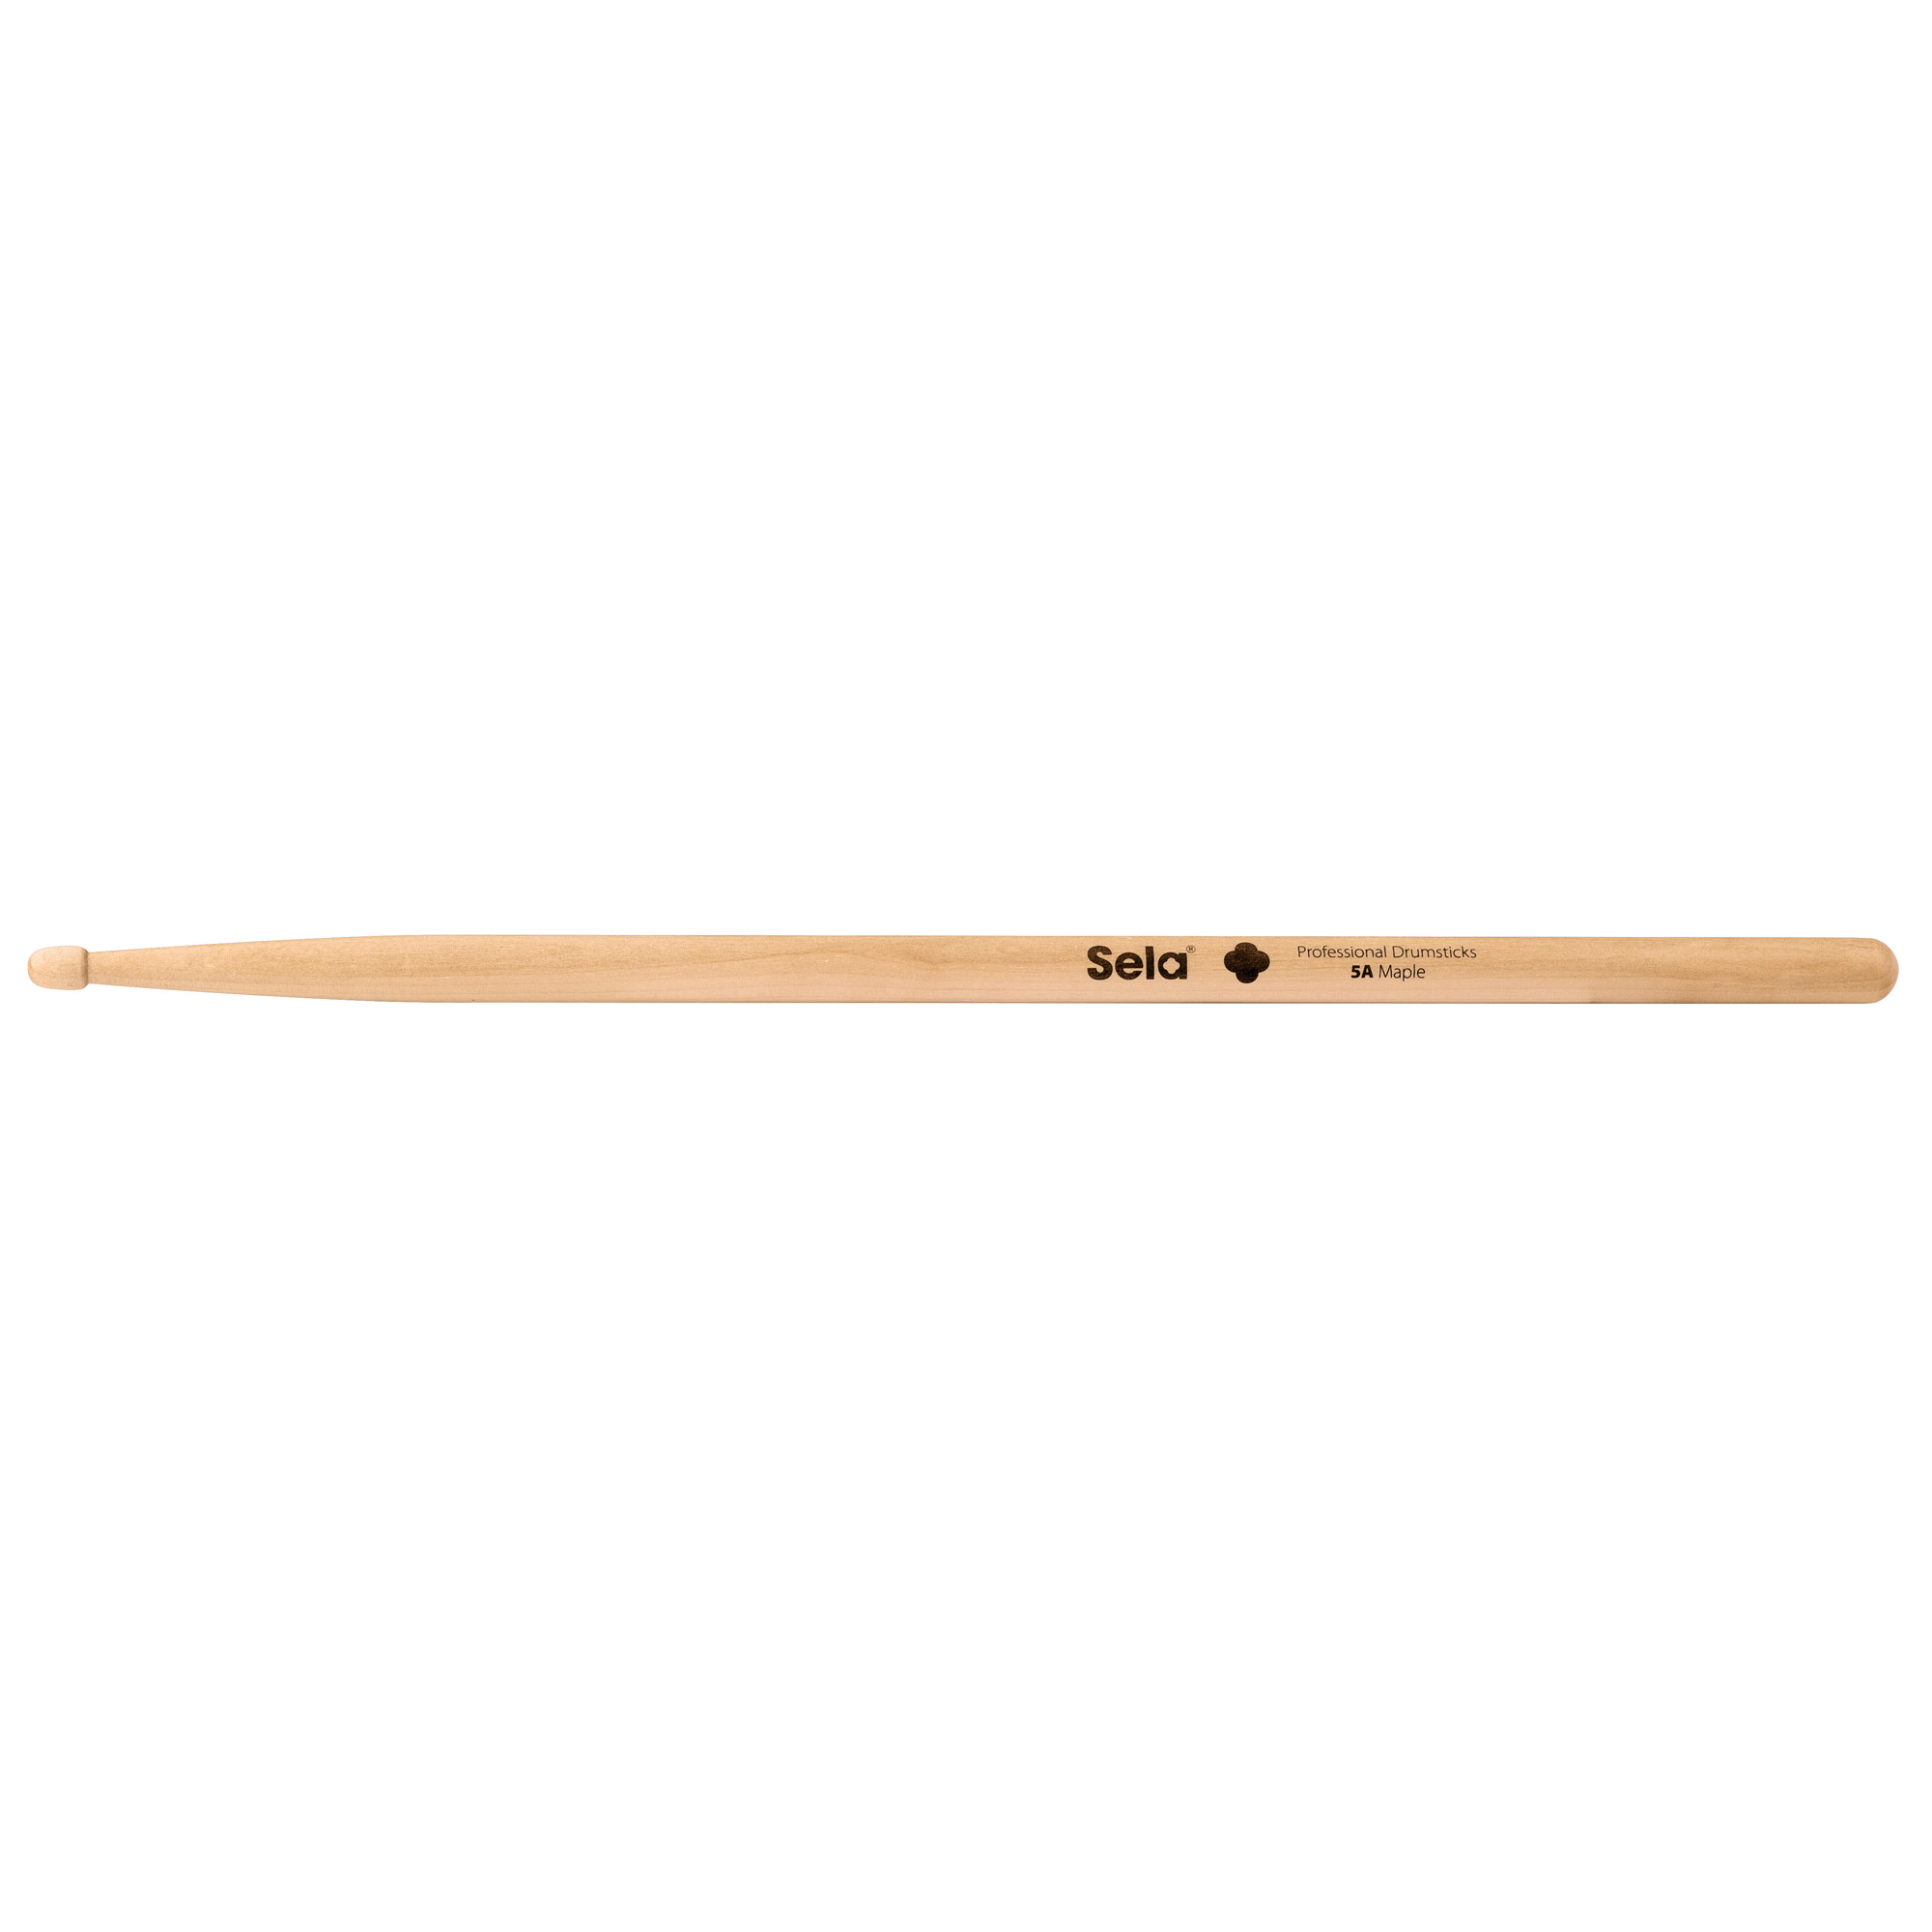 Professional Drumsticks 5A Maple (6 Pair) Product Photos 2